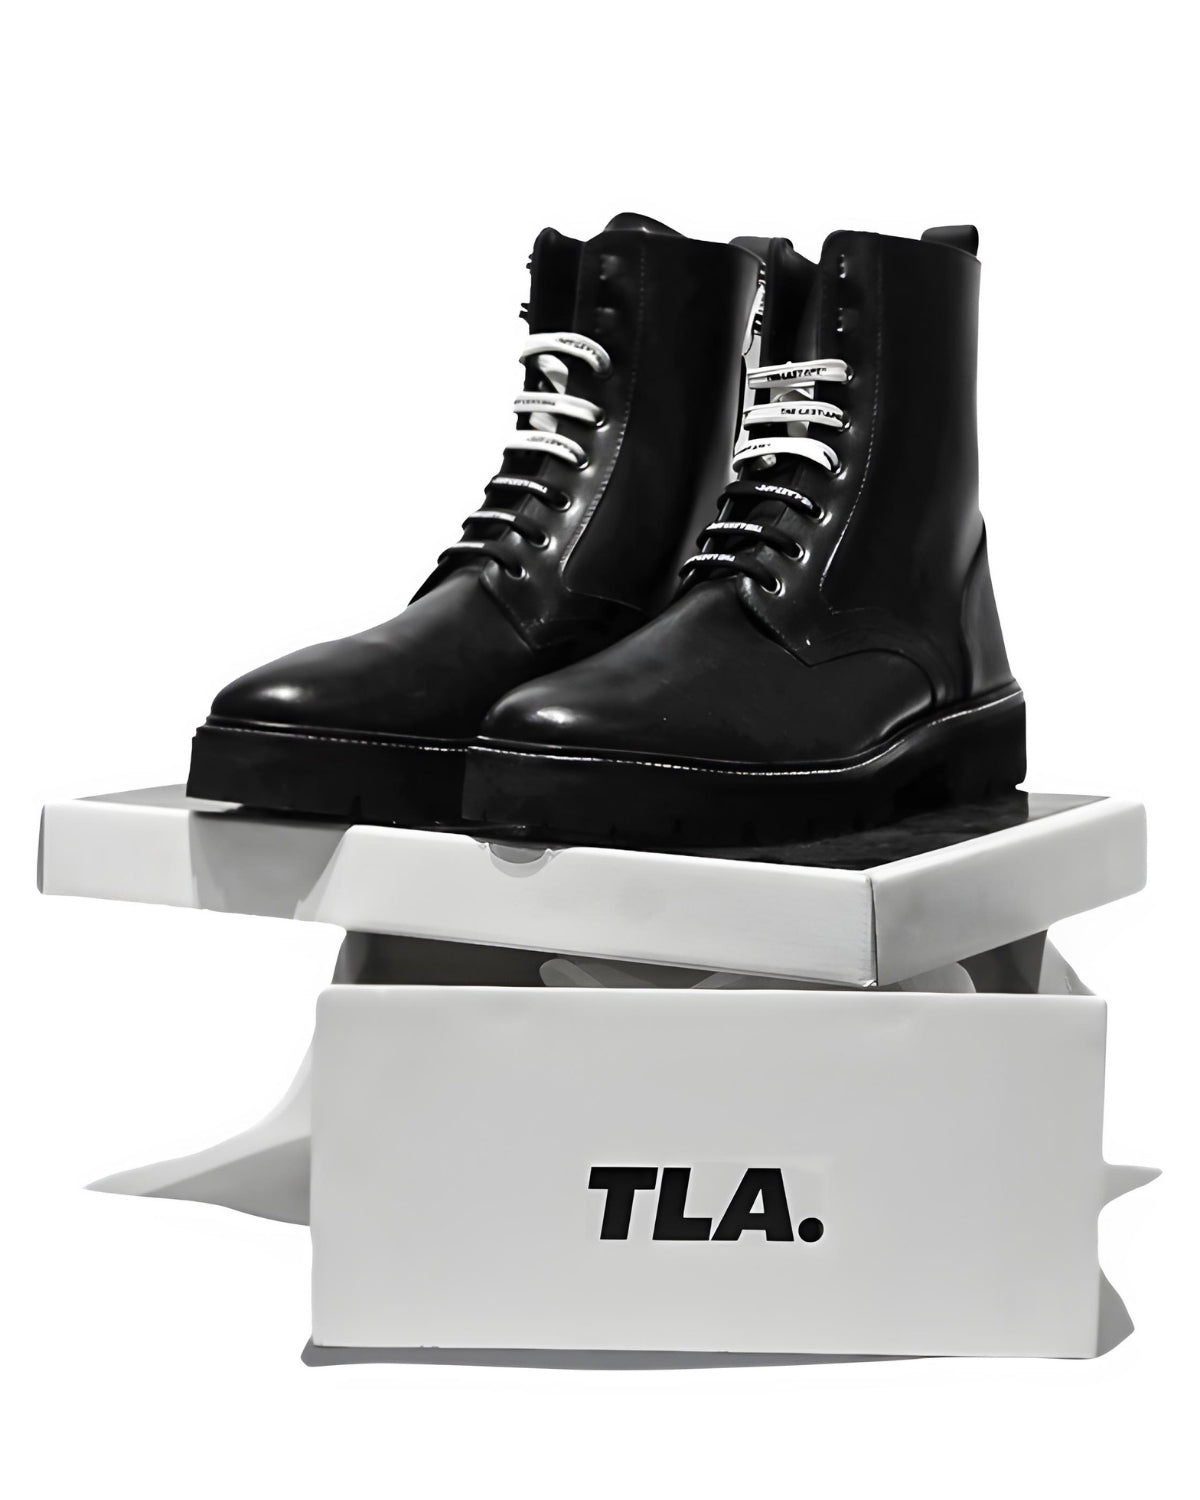 TLA High Ankle Boots